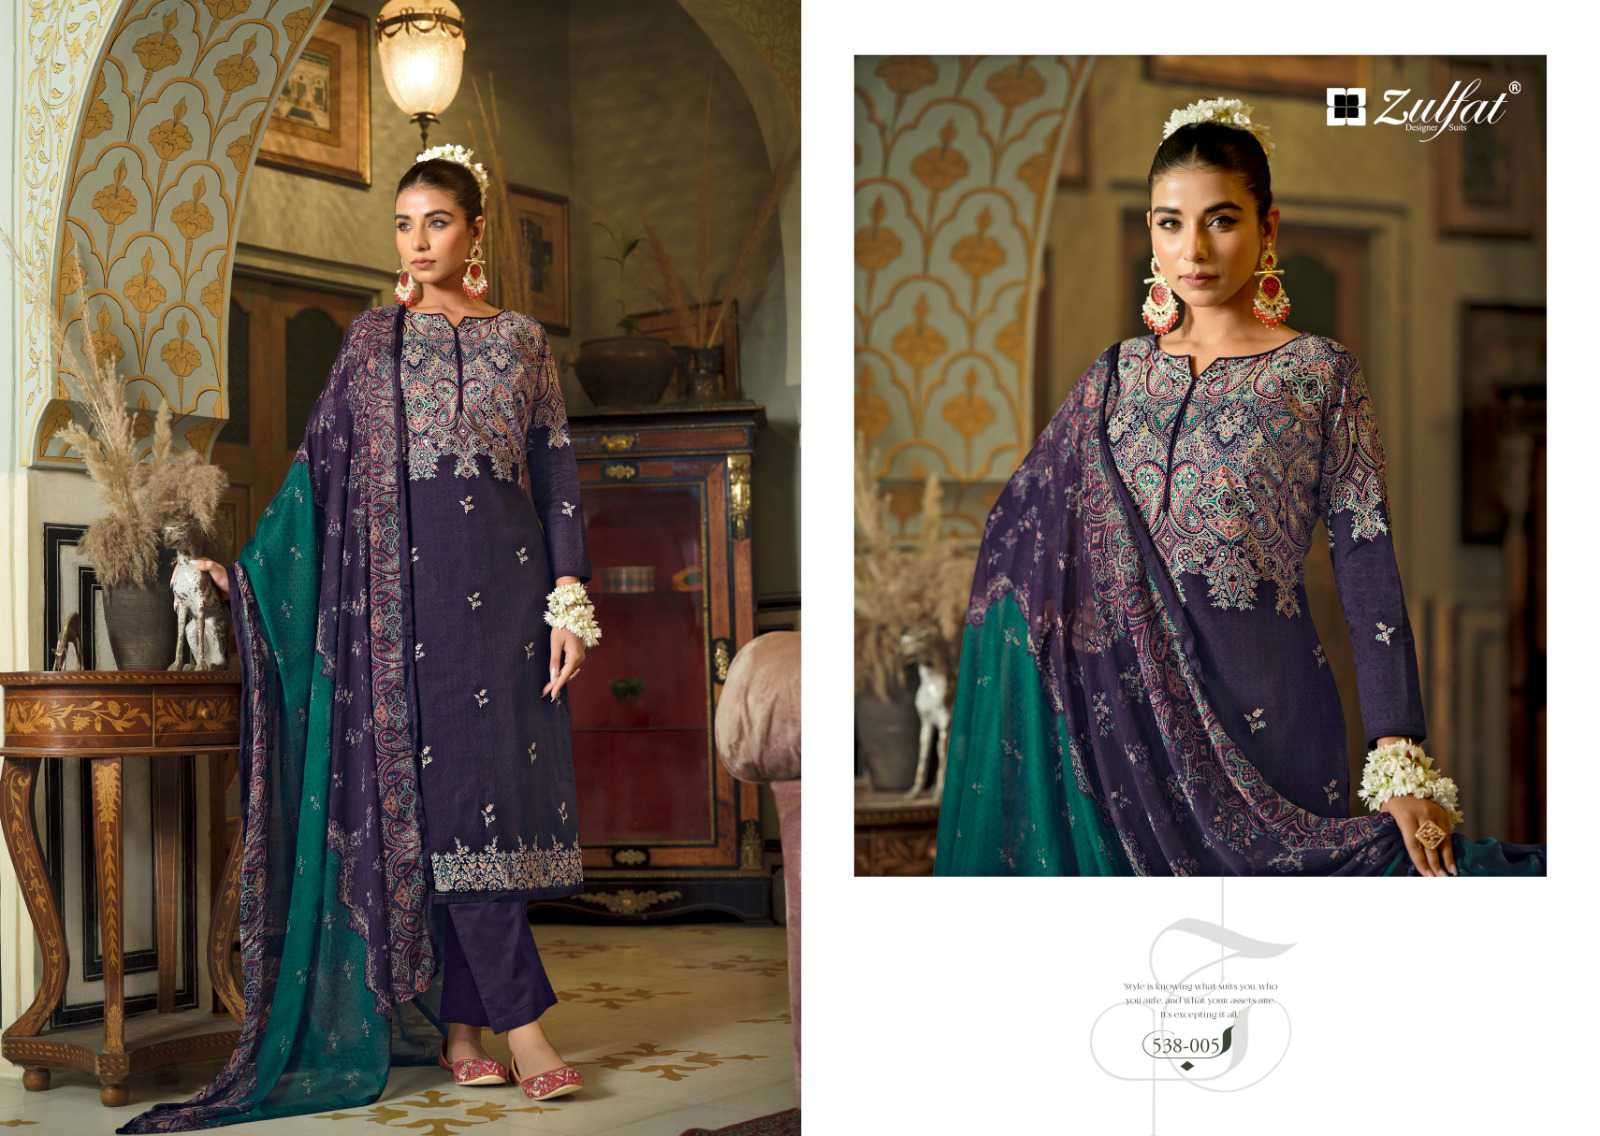 Zulfat Designer Suits Dilruba Vol 2 Cotton With Embroidery Work Ethenic Wear Salwar Suits At Wholesale Price